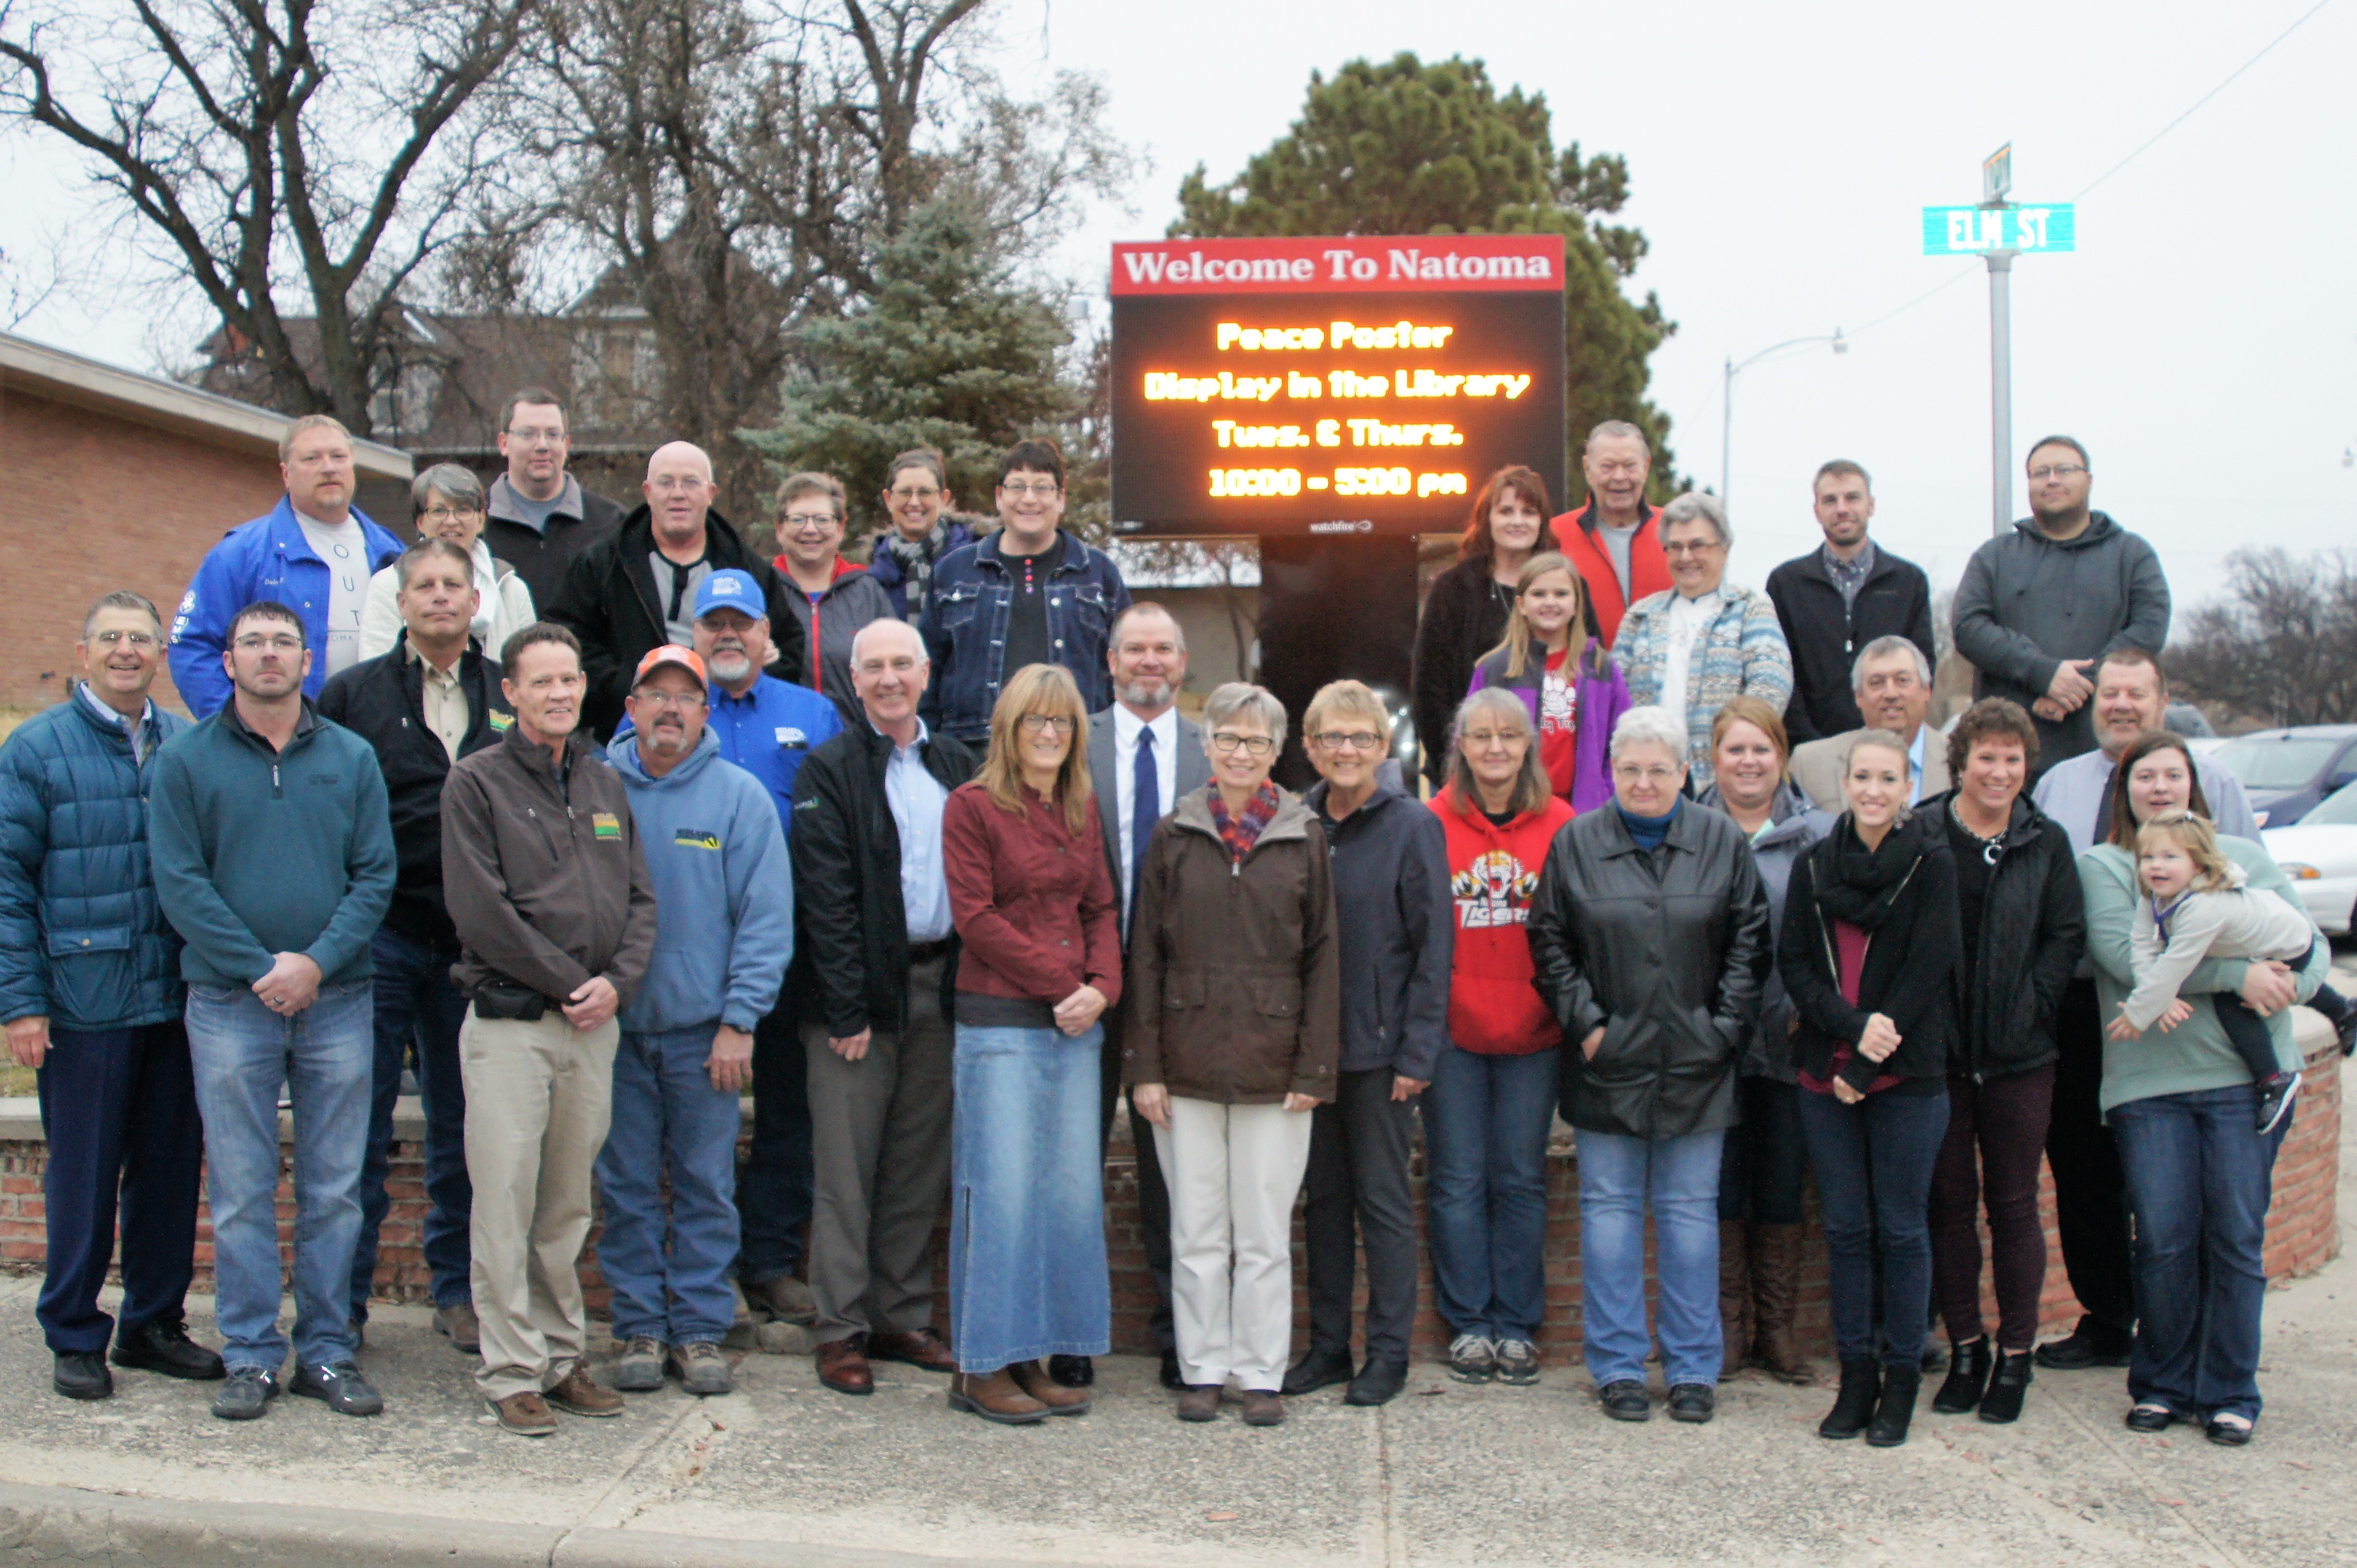 More than two dozen citizens of Natoma, Kansas stand in front of a large outdoor LED sign installed in the city to keep members informed of community events.